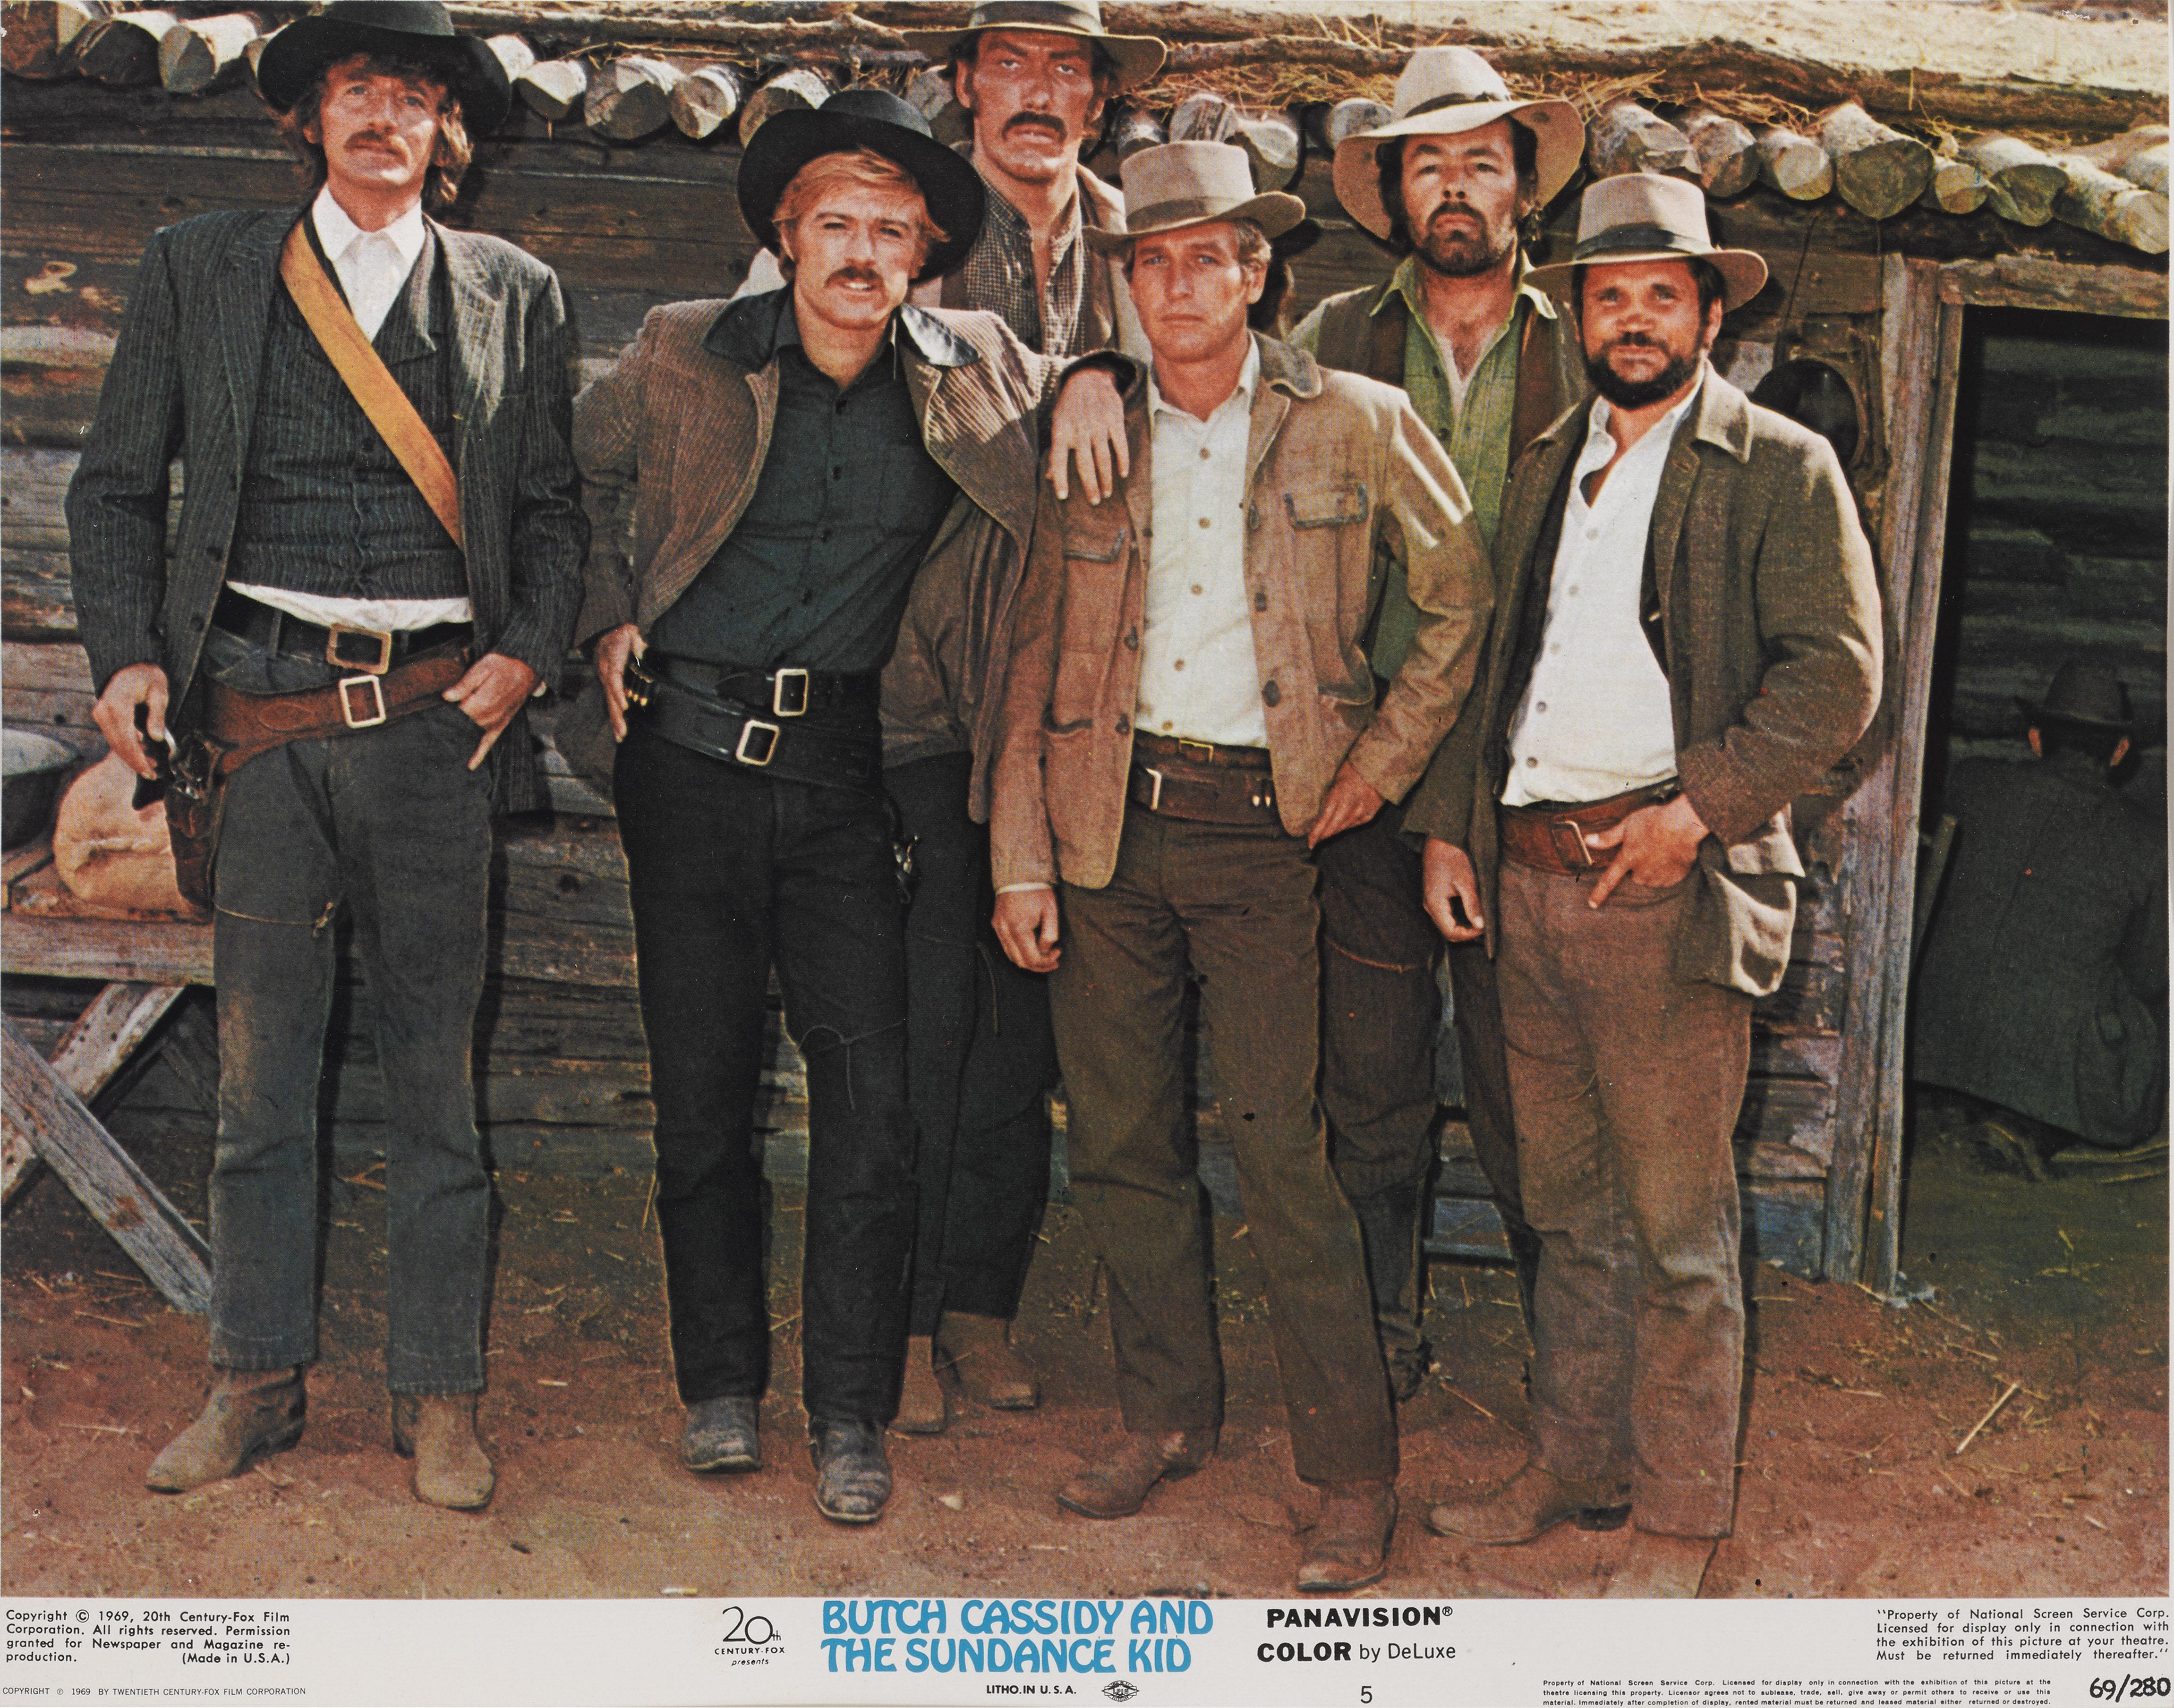 Original US lobby card for the 1969 classic western staring Paul Newman, Robert Redford, Katherine Ross.
This lobby card shows Butch and Sundance with the Hole-in-the-Wall Gang.
This film was directed by George Roy Hill.
This piece is framed in a